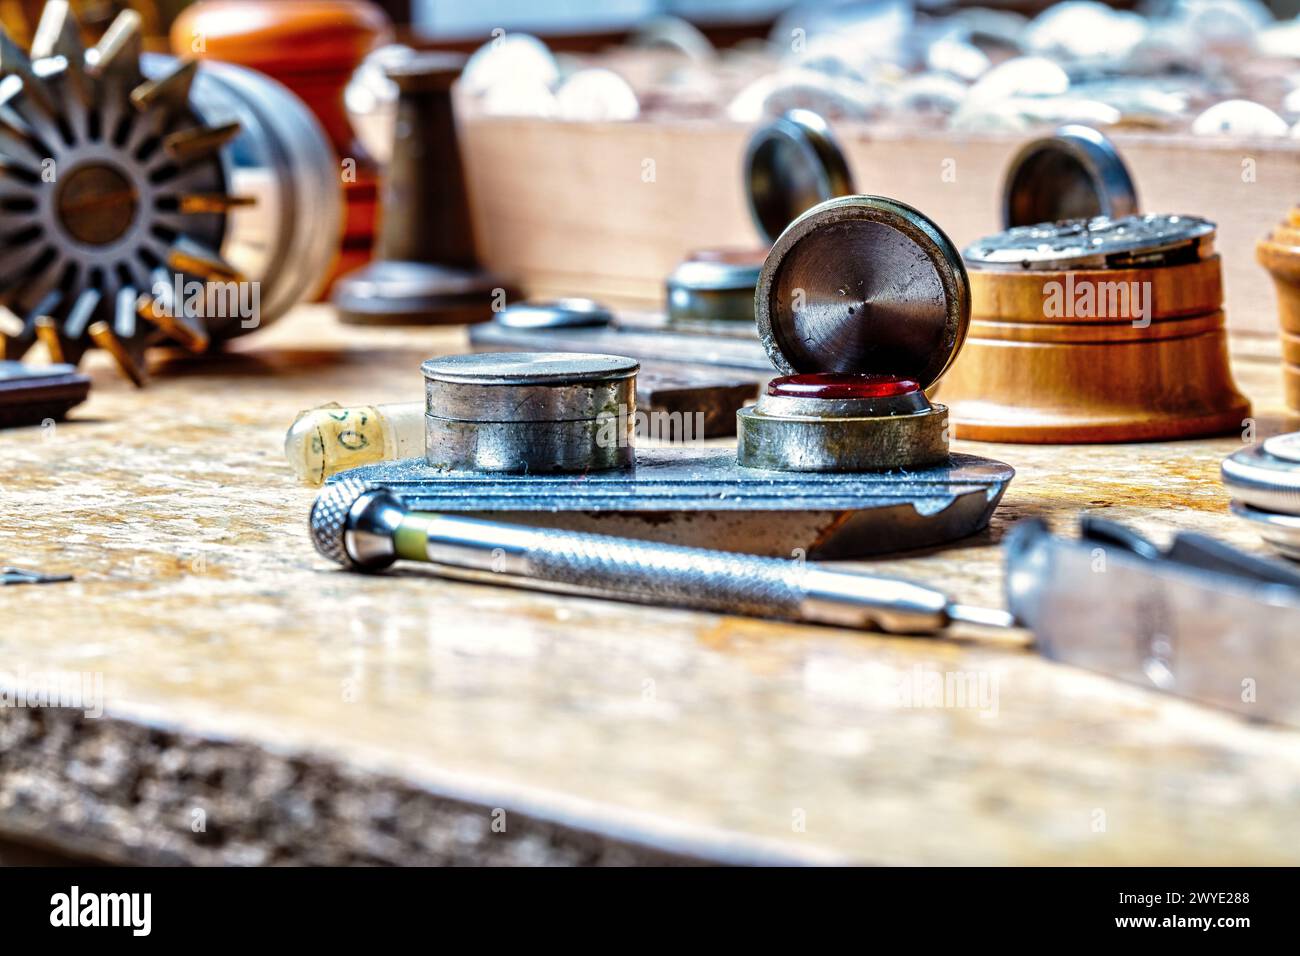 precise art of horology unfolds as a watchmaker sets wheels in motion on a wooden bench Stock Photo